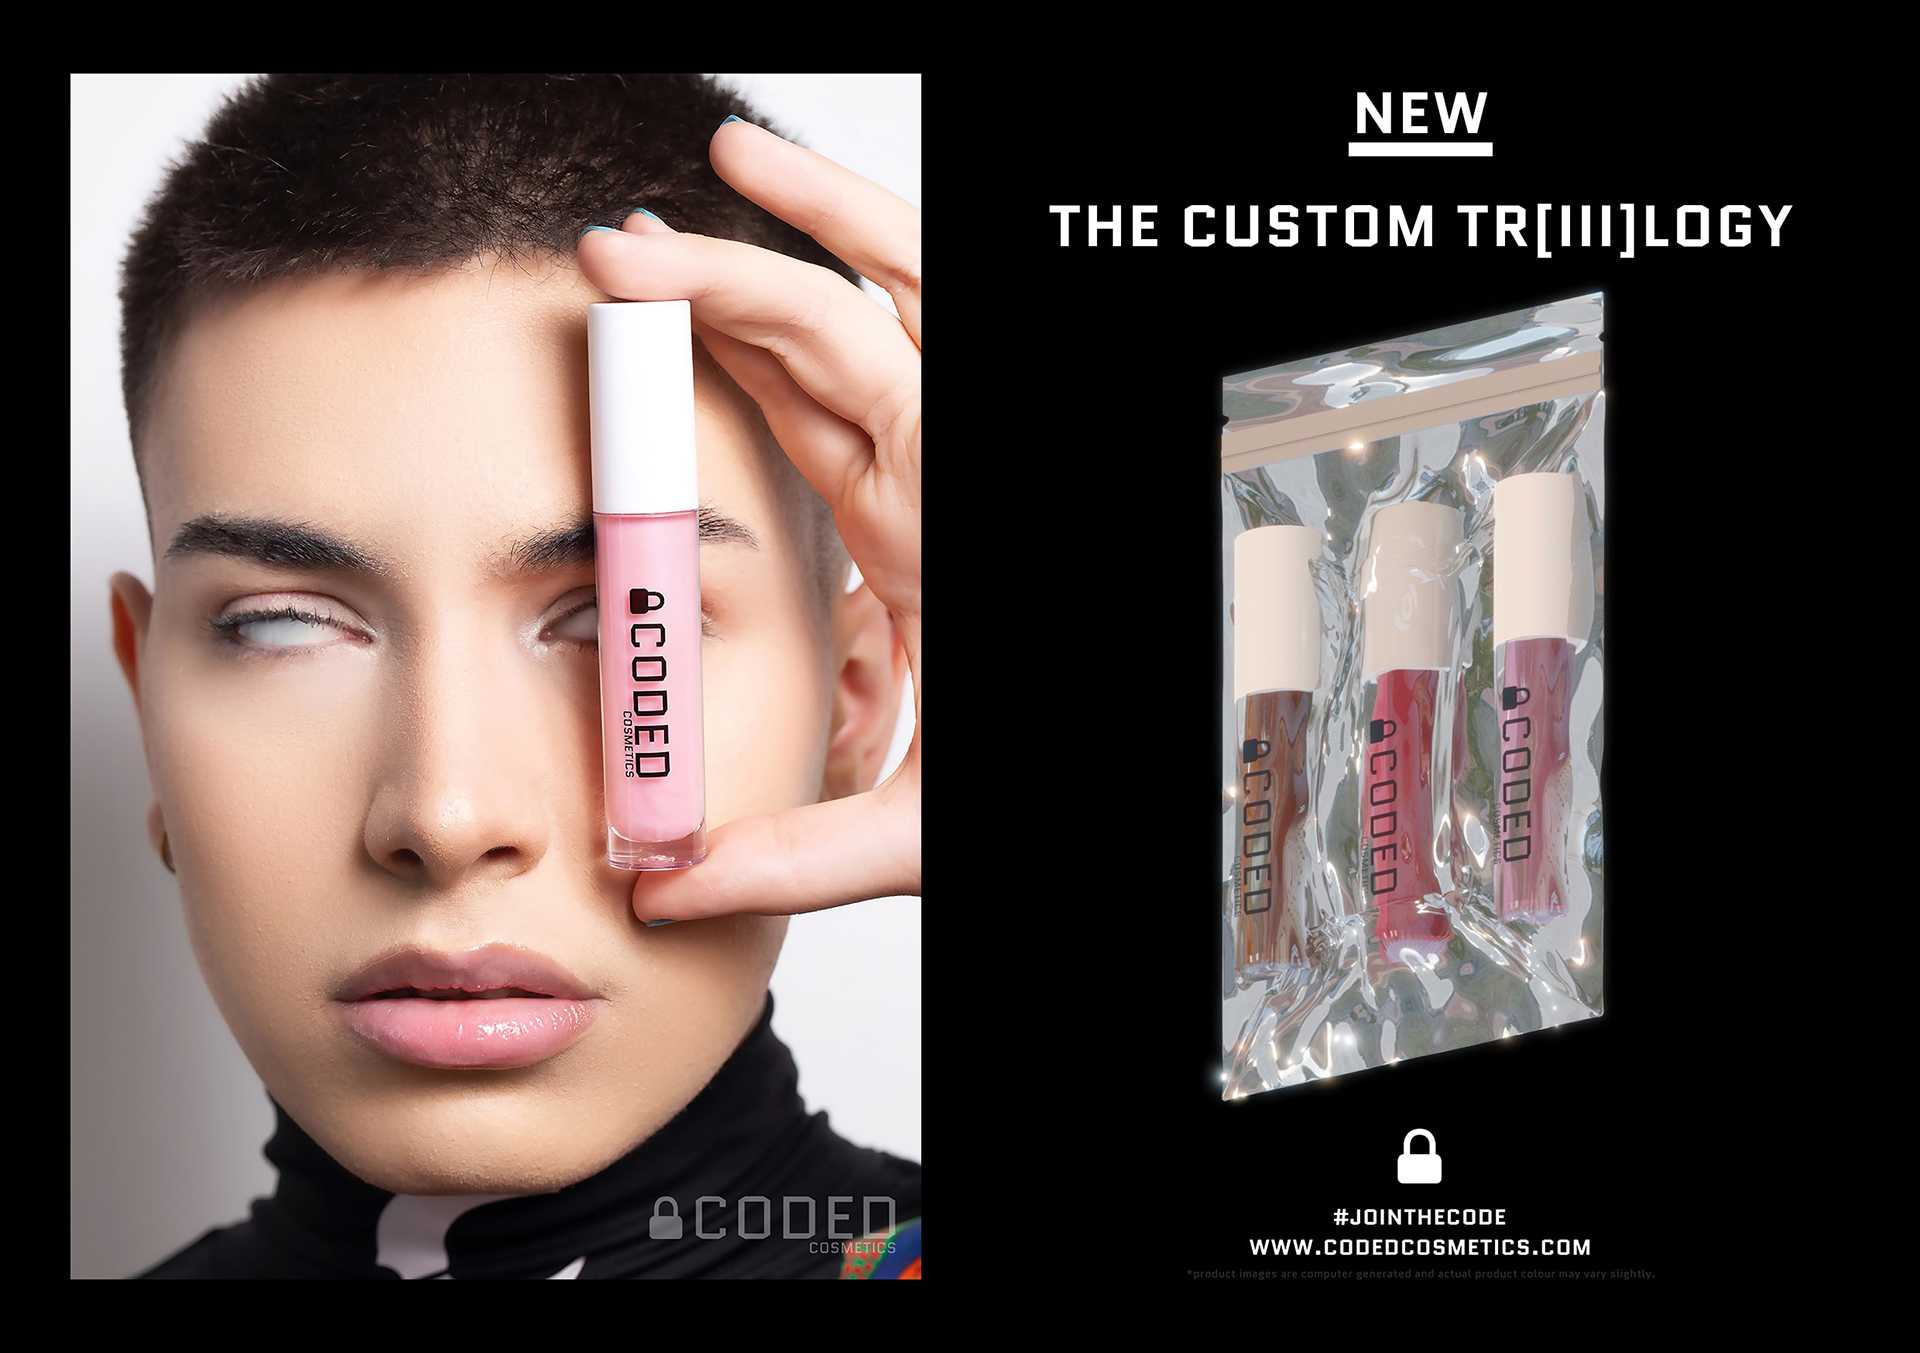 Coded Cosmetics 'The Custom Trilogy' promotional asset